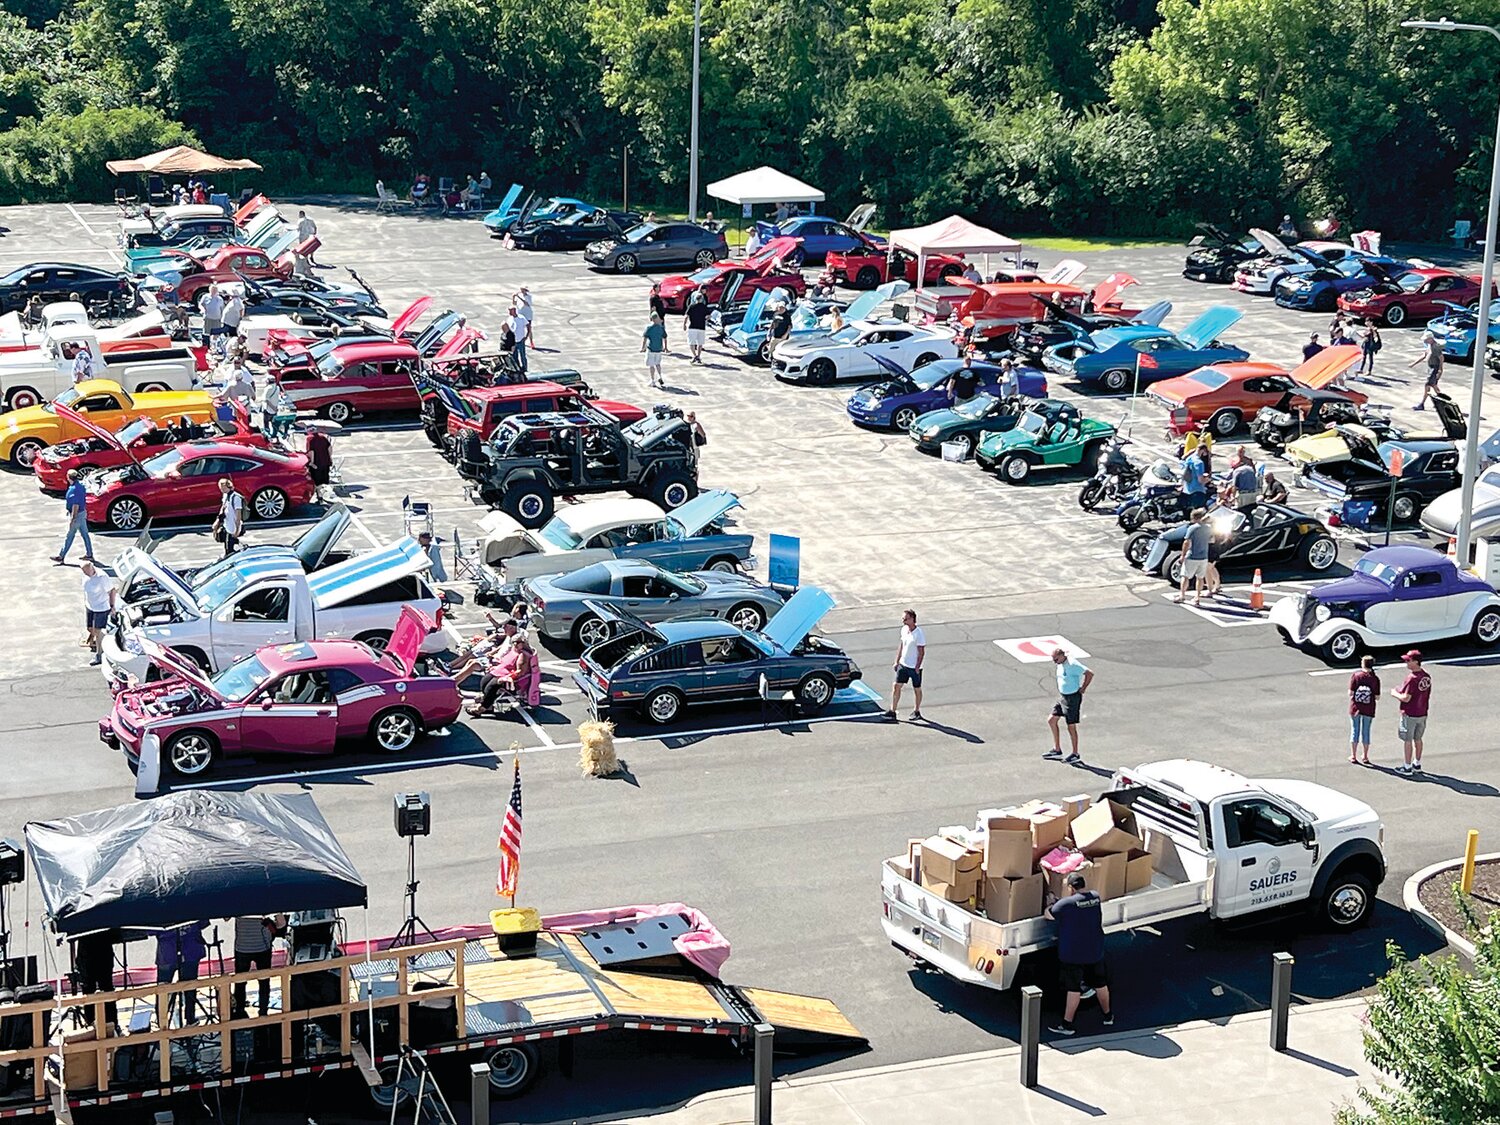 The Muscle Up Against Cancer Car Show, presented by Sauers Cares on July 8, will benefit three cancer care nonprofits – the Cancer Support Community Greater Philadelphia, Kin Wellness and Support Center, and For Pete's Sake Cancer Respite Foundation.